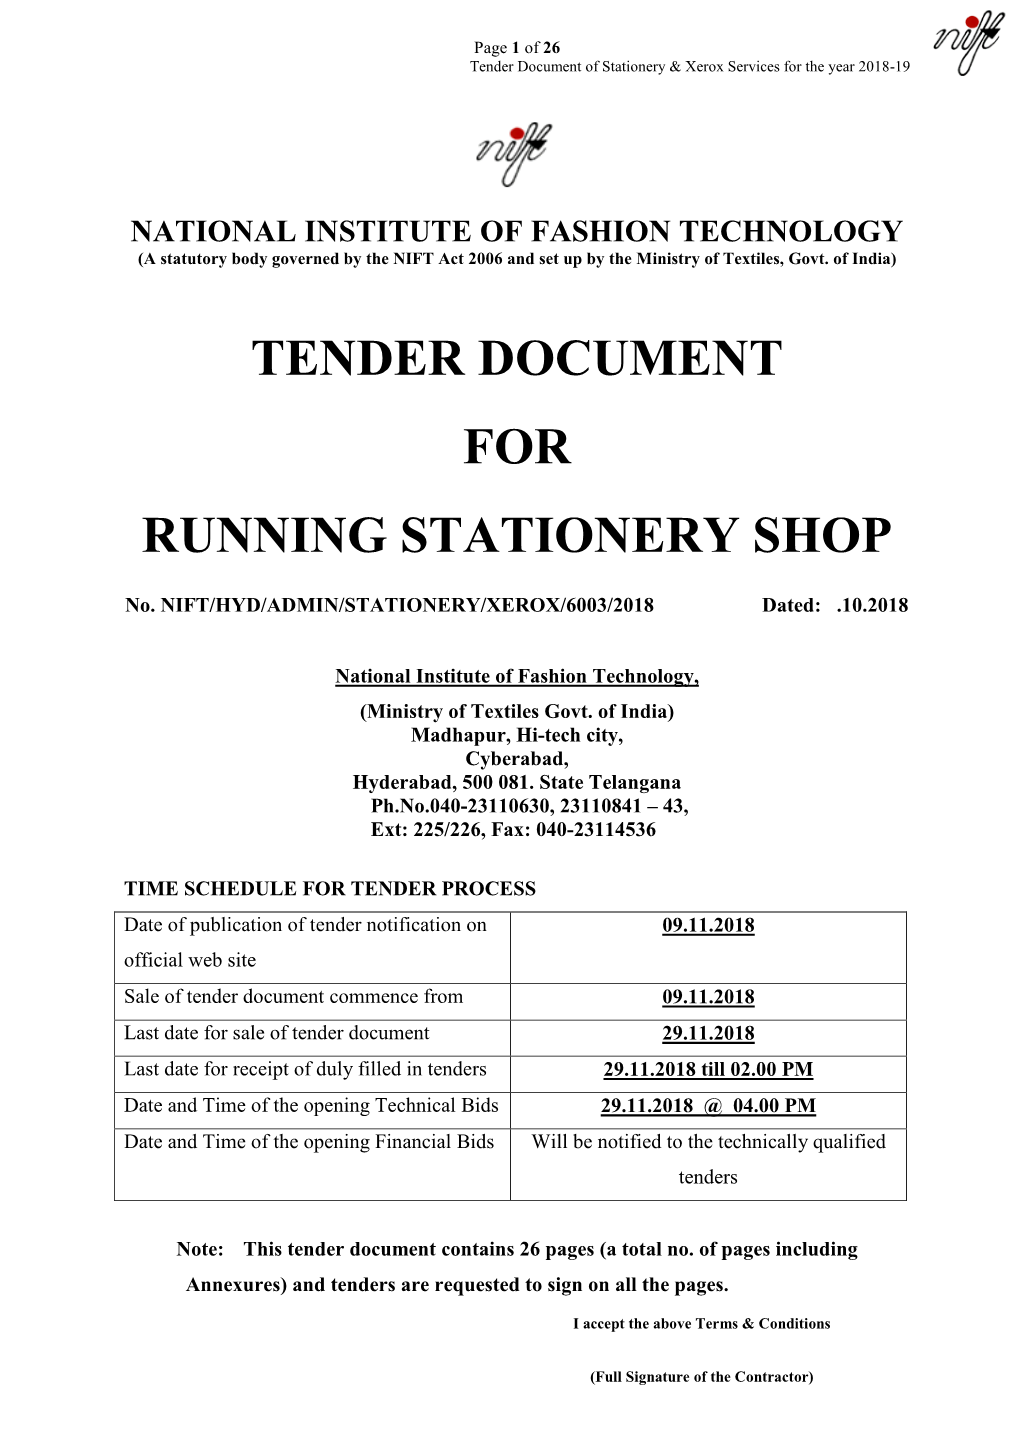 TENDER DOCUMENT for RUNNING STATIONERY SHOP No